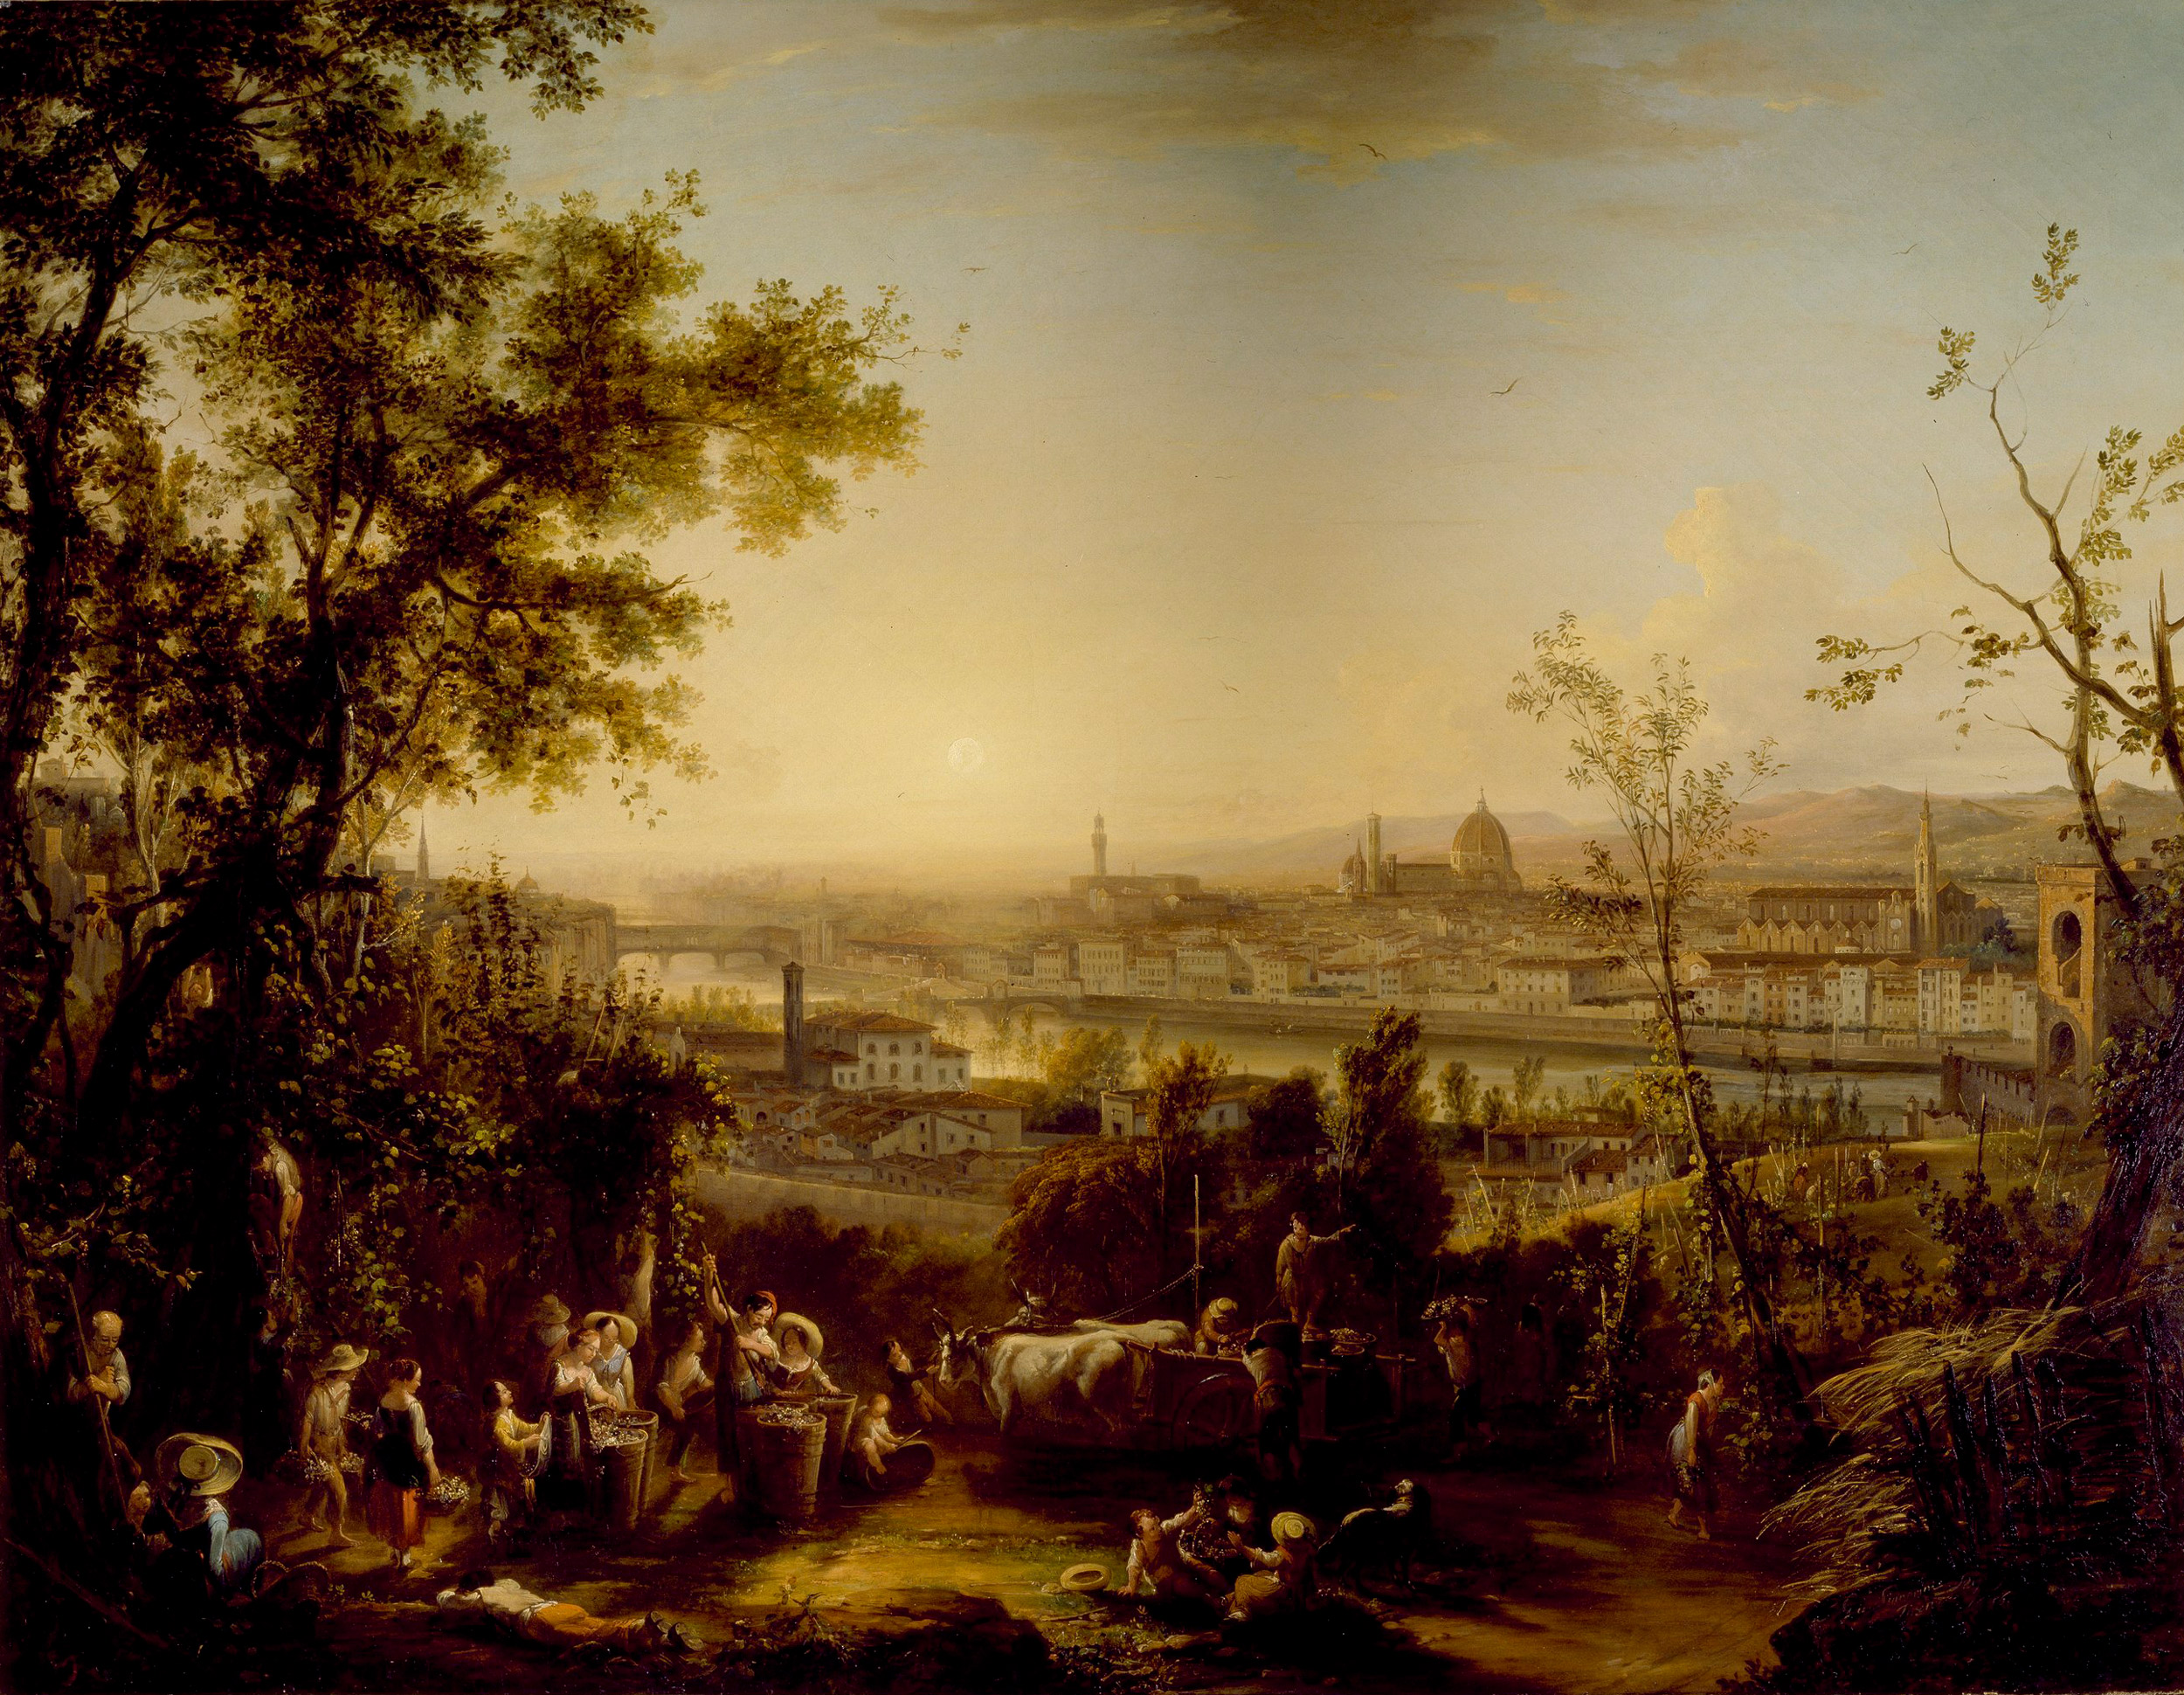 Florence through the artist’s eyes - From Signorini to Rosai